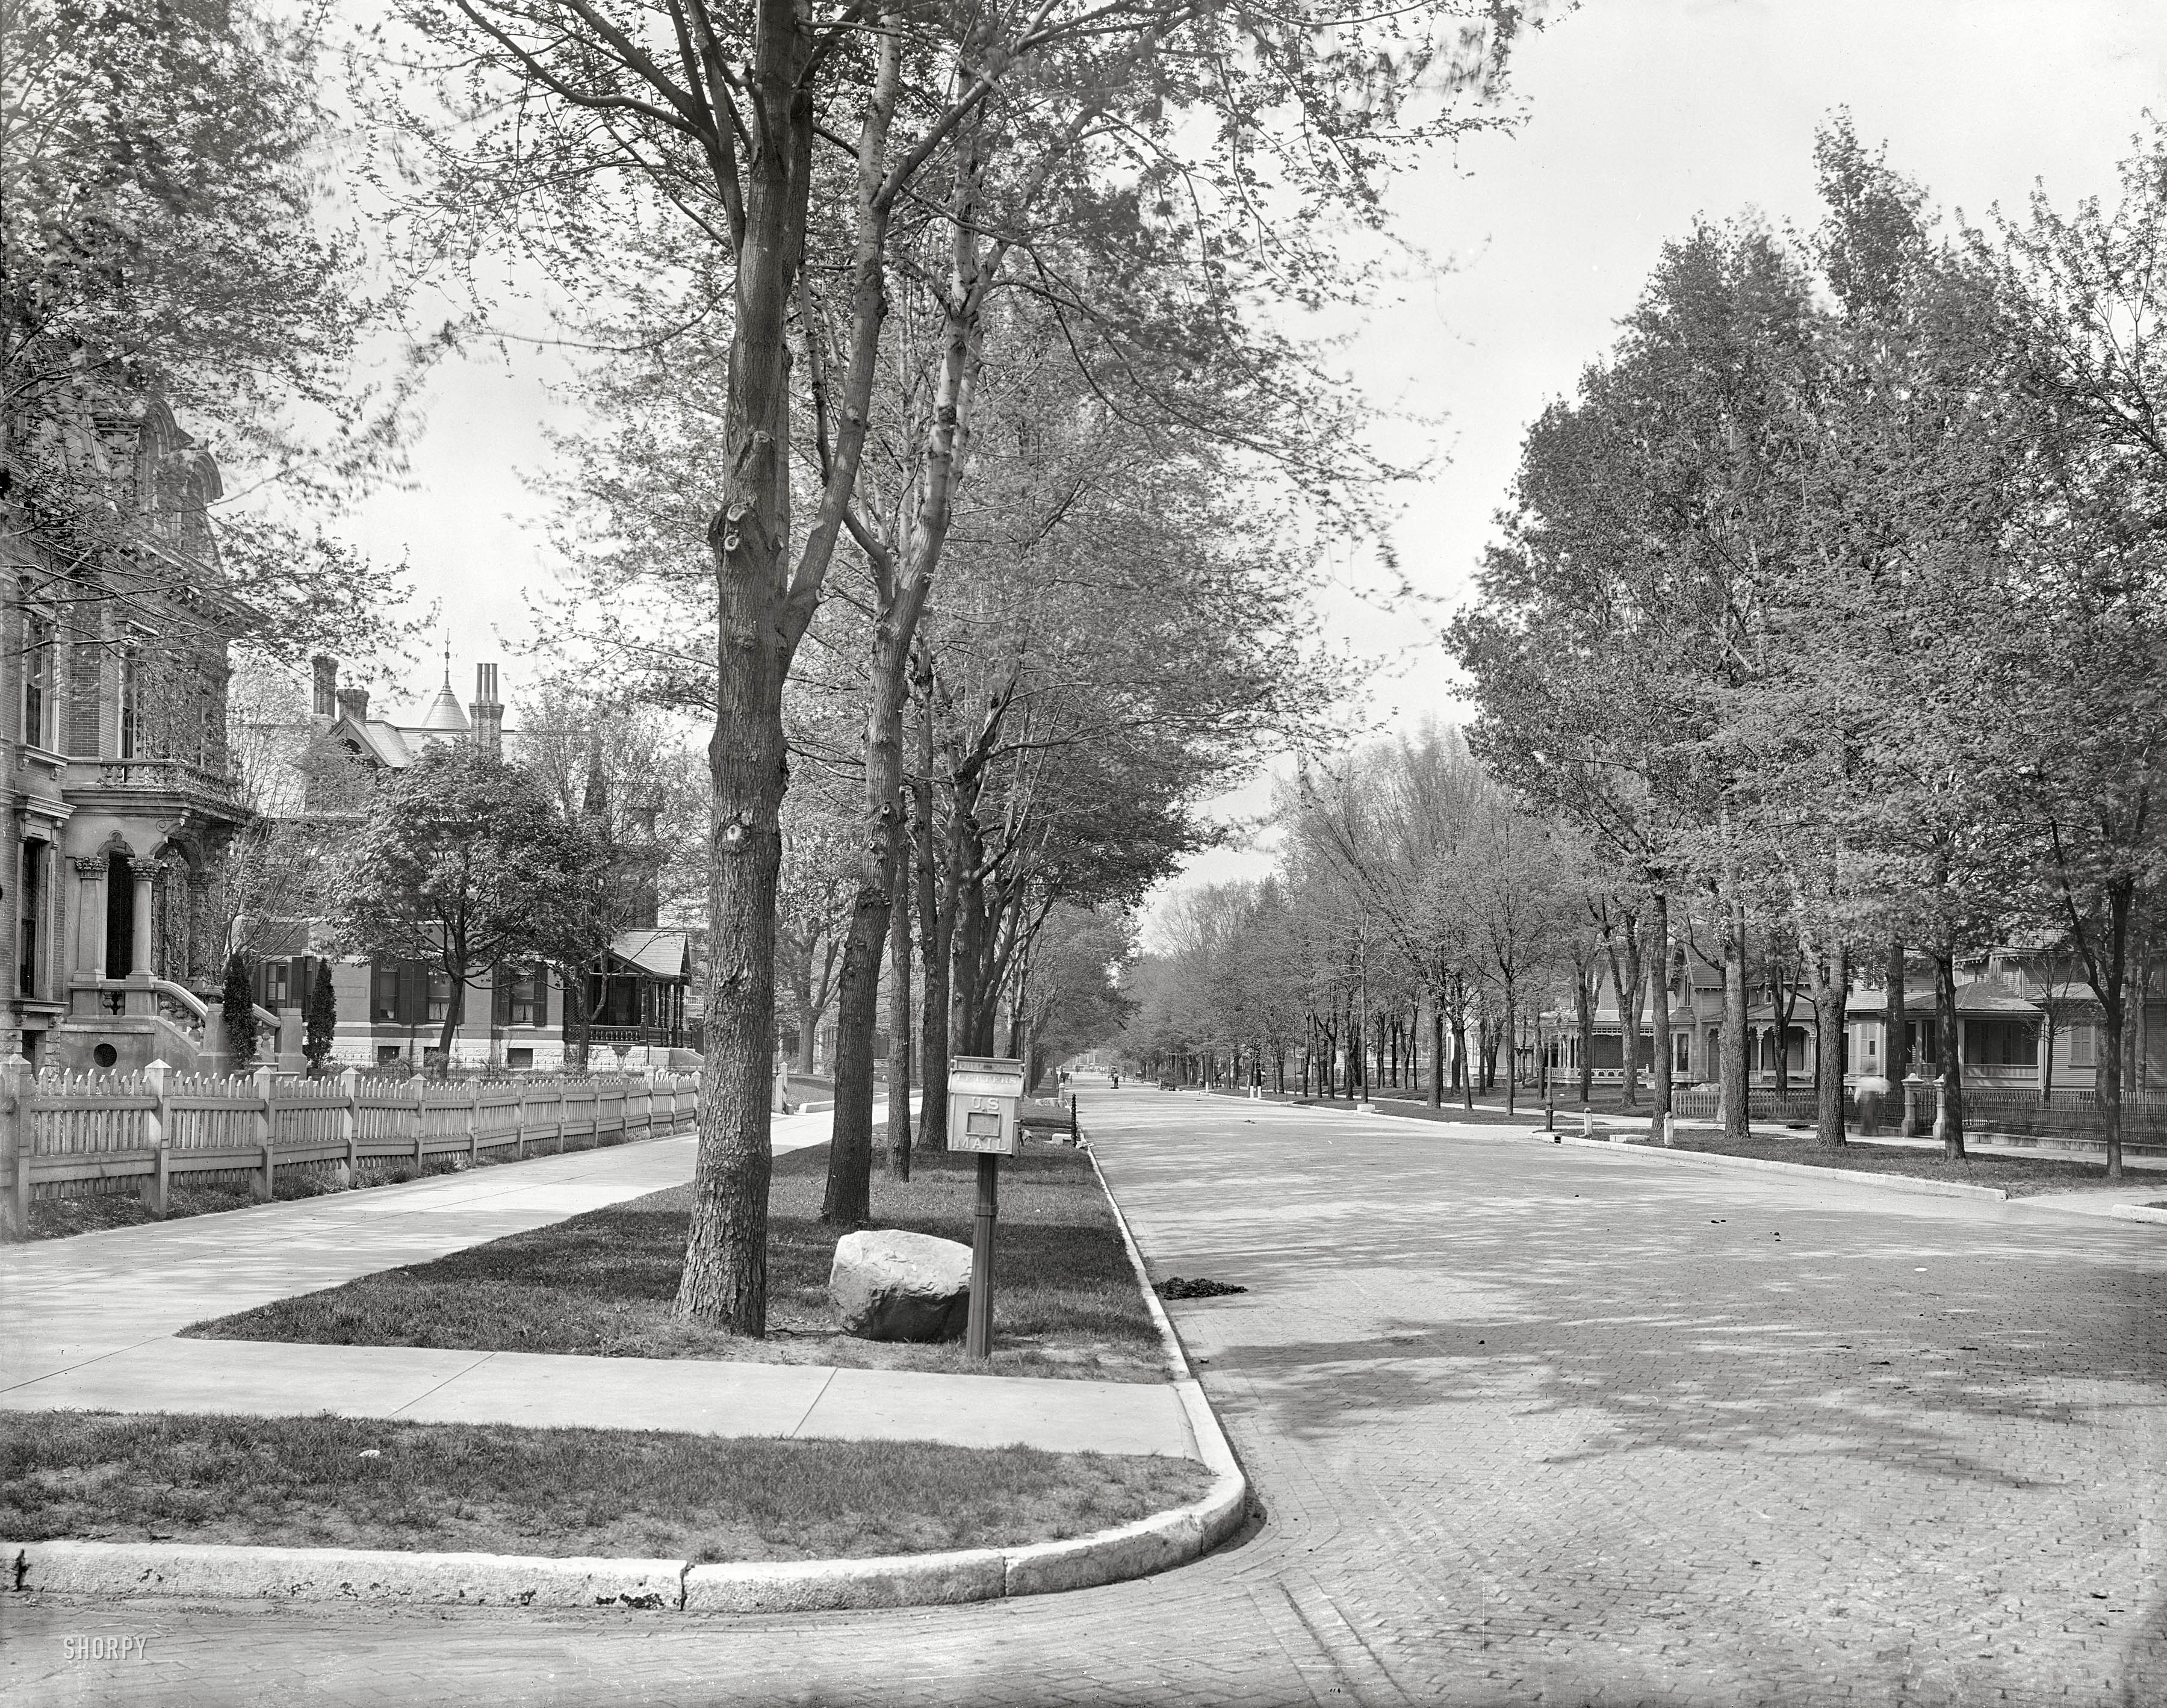 Indianapolis, Indiana, circa 1904. "North Delaware Street." A block east of our previous Indy view, this leafy residential street is furnished with a mailbox and mounting blocks as well as hitching posts; one block bears the house number 656. Detroit Publishing Company, 8x10 inch glass transparency. View full size.